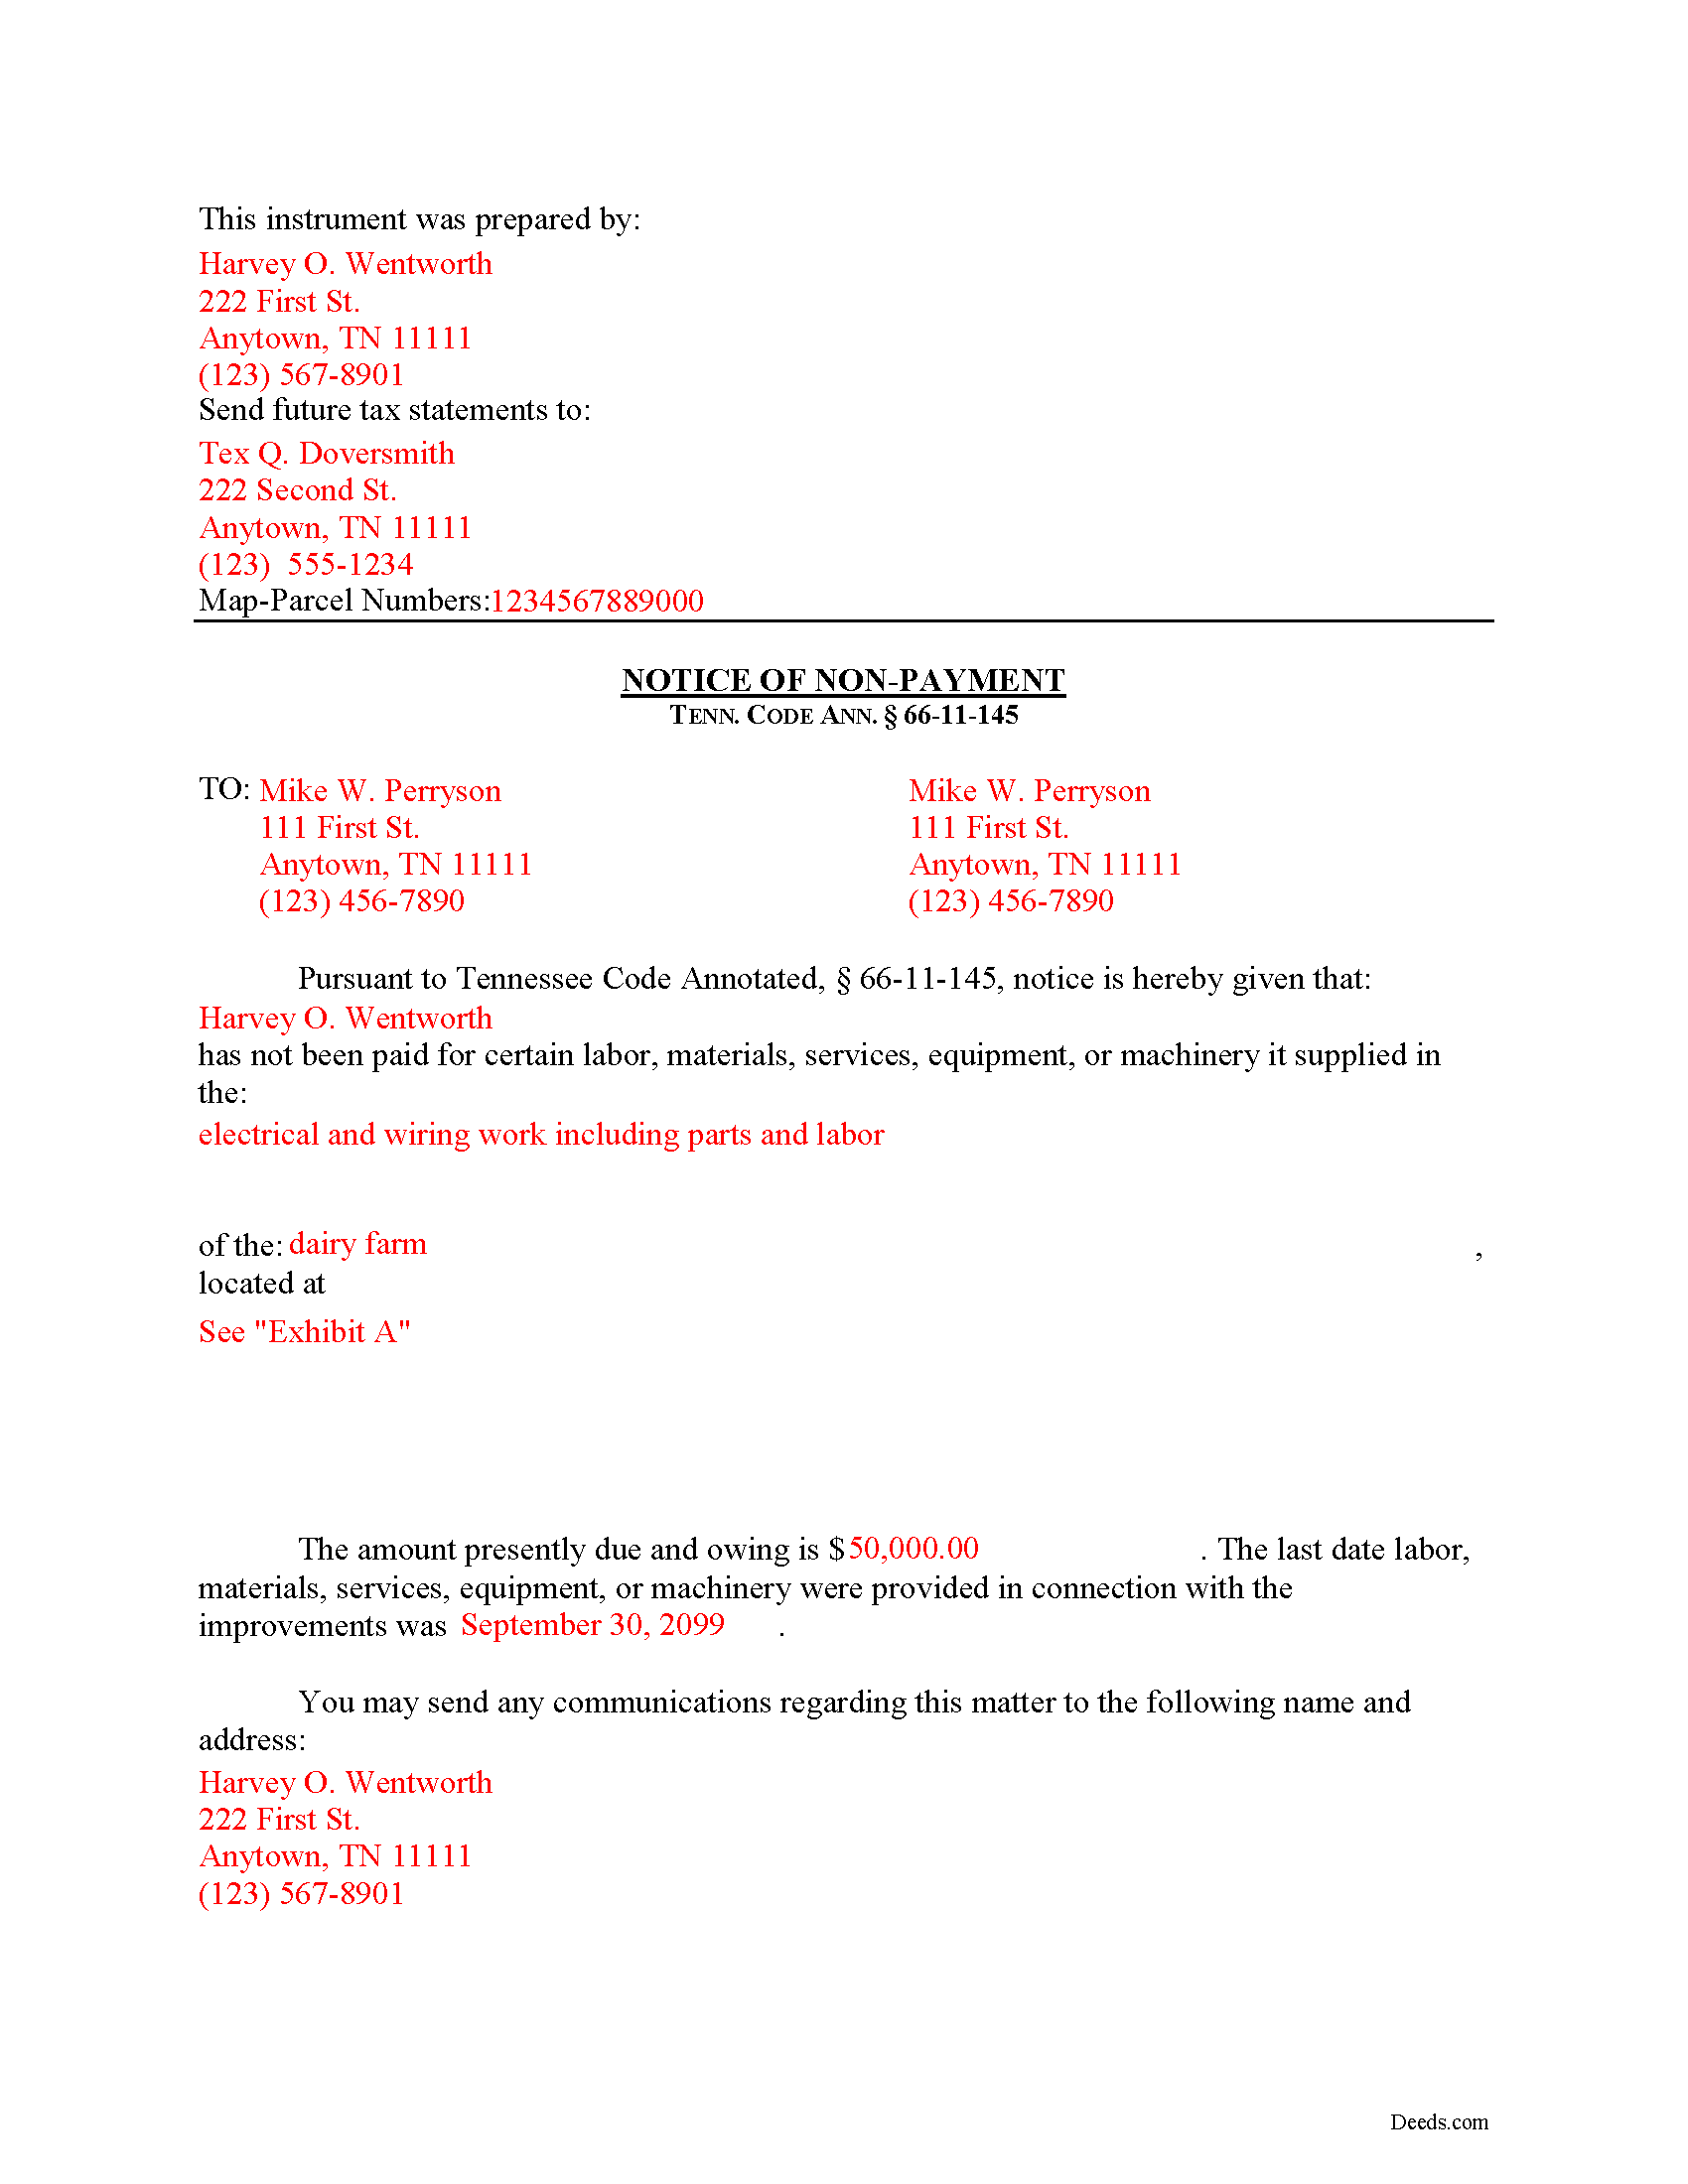 Completed Example of the Notice of Non-Payment Document